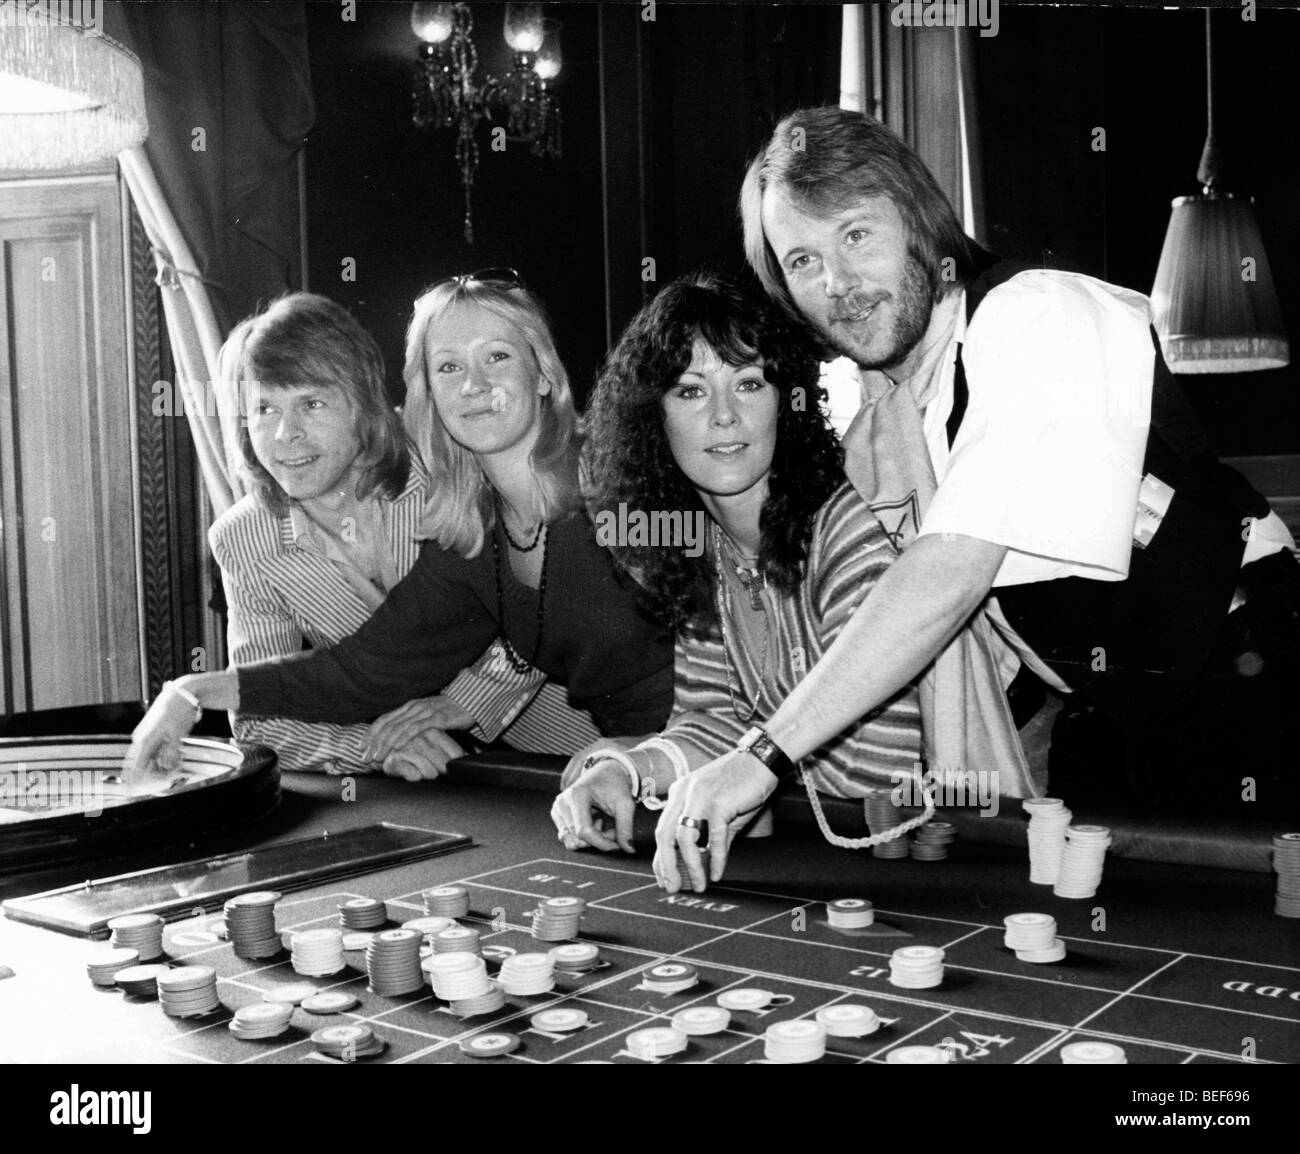 ABBA play roulette in the late-1970's (L-R) Björn Ulvaeus, Agnetha Fältskog, Anni-Frid Lyngstad (Frida), and Benny Andersson Stock Photo